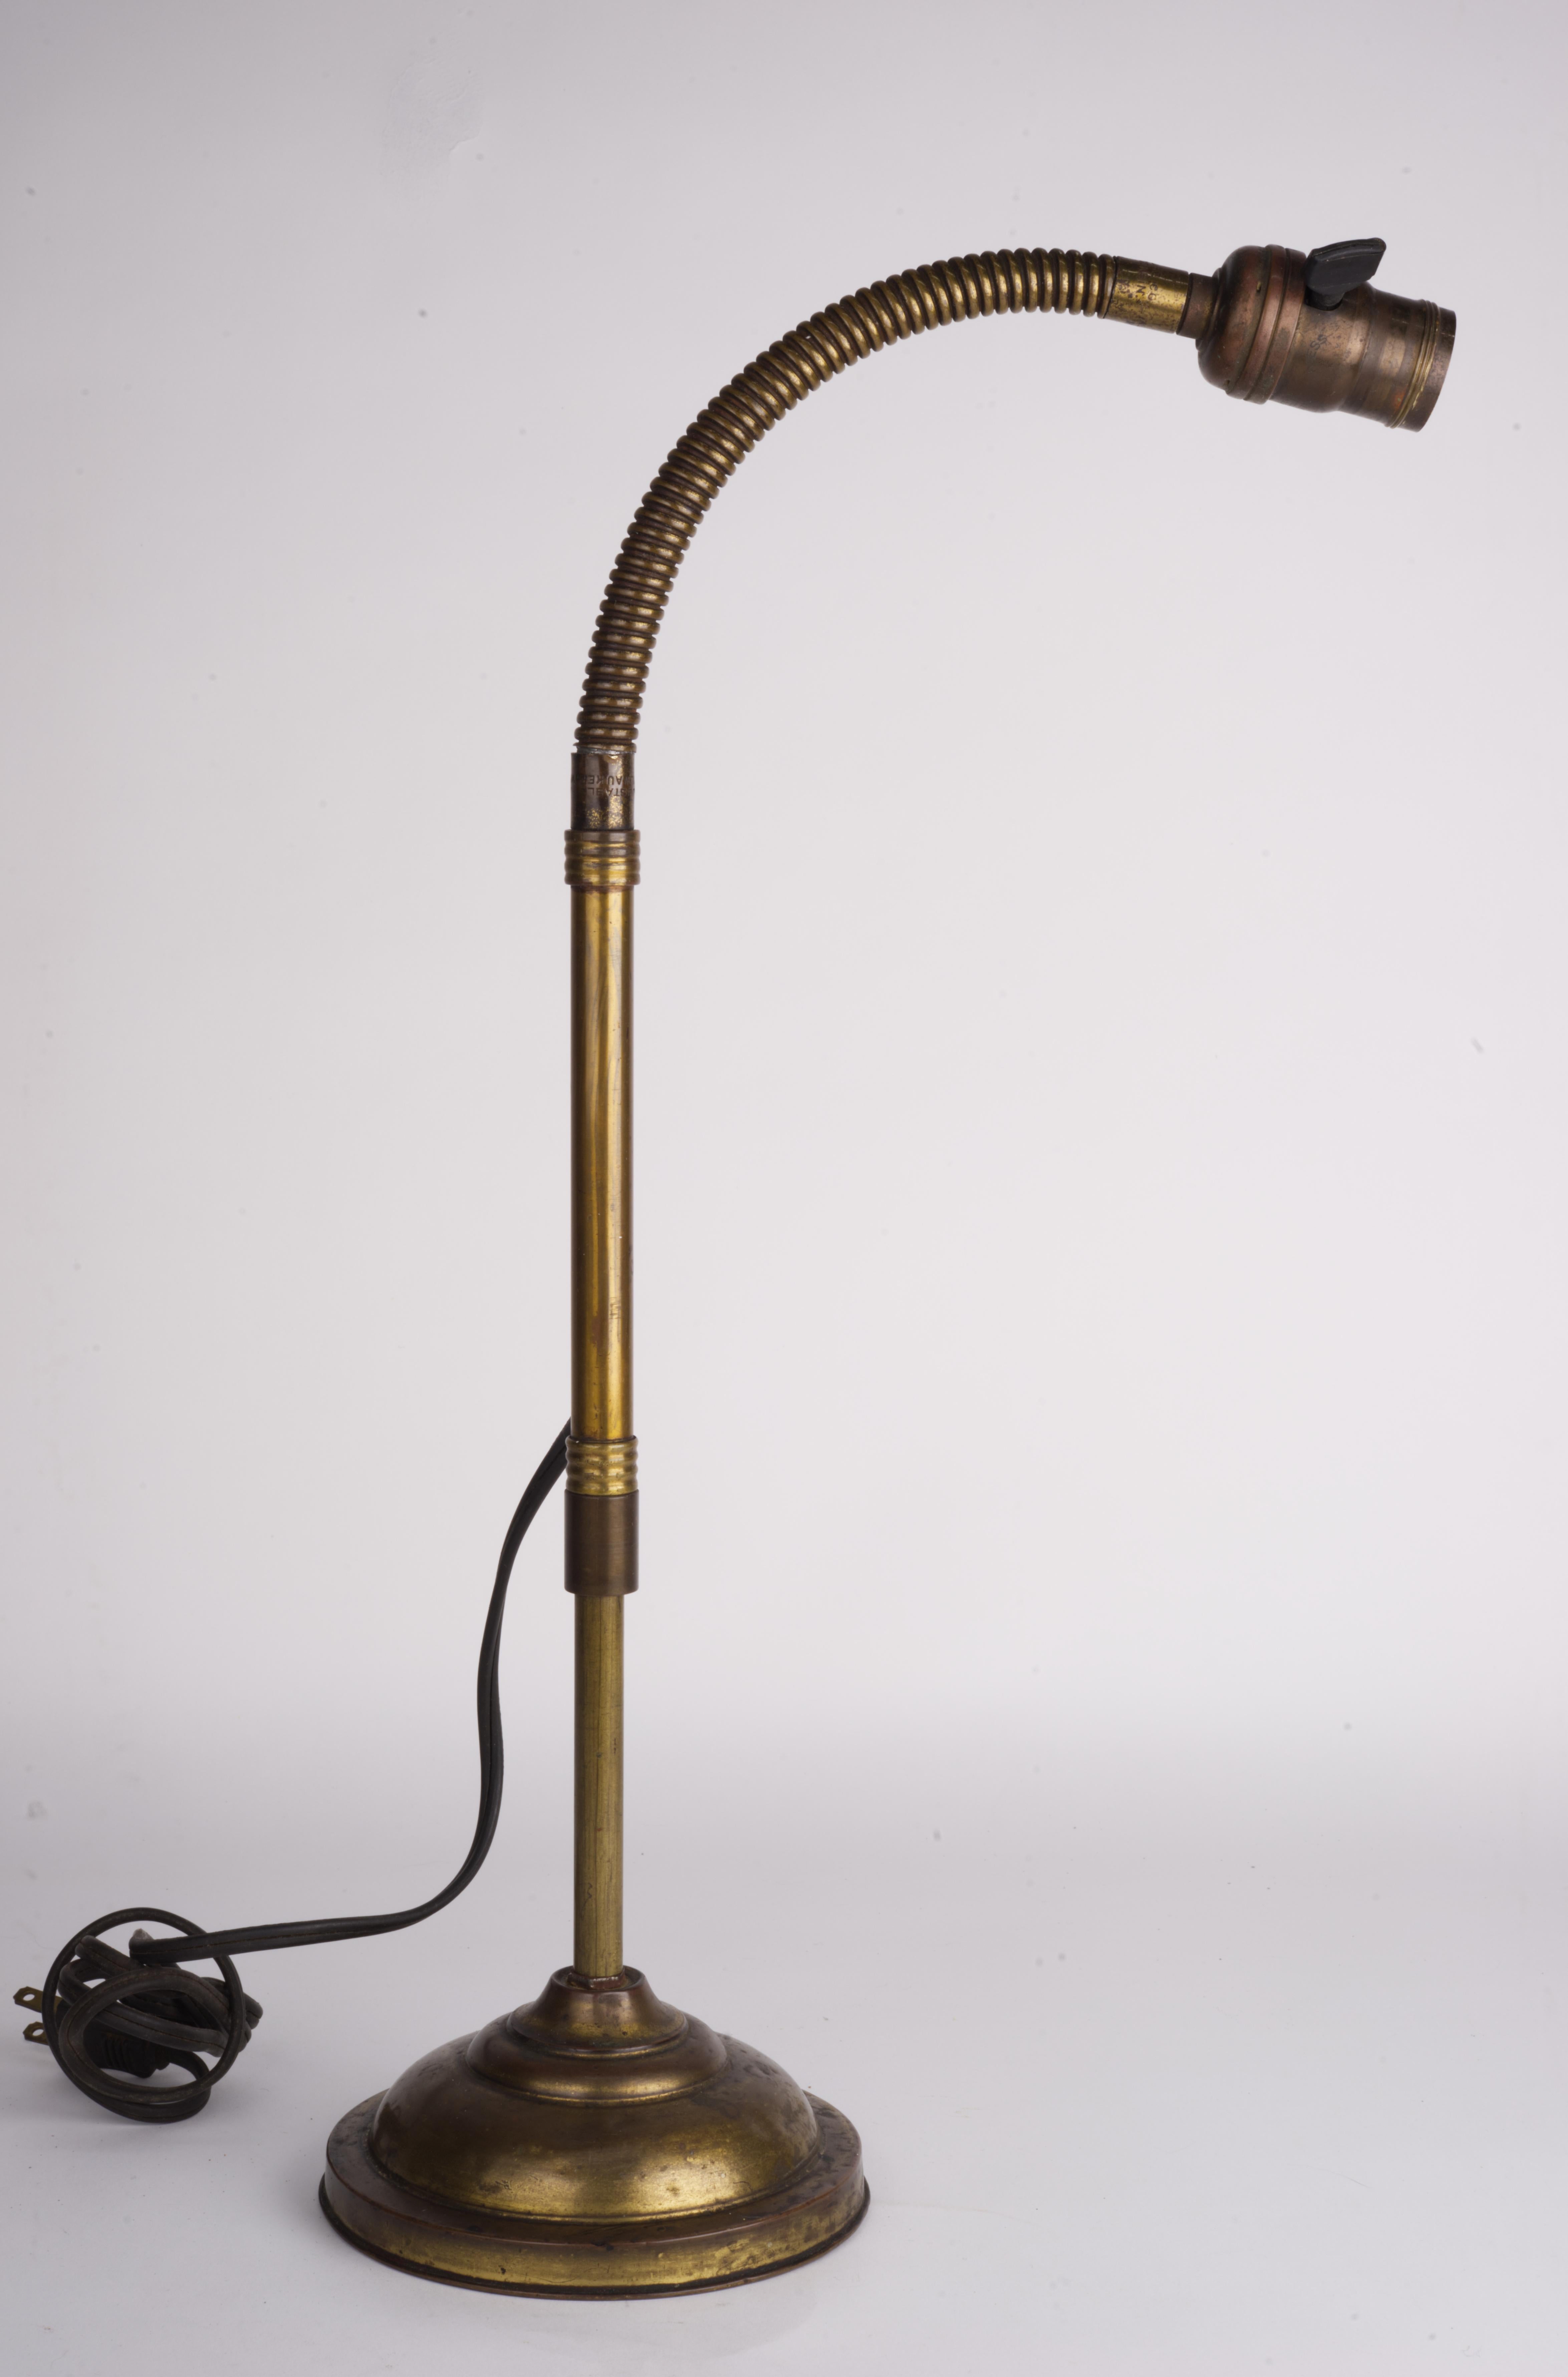 The Adjustable Fixture Co. was established in 1911 in  62 Mason St, Milwaukee , Wisconsin. 
Famous for premium residential and designer lighting  they also specialized in industrial and medical fixtures. 
Similar to #313 (Catalog #30, Tafco Line)